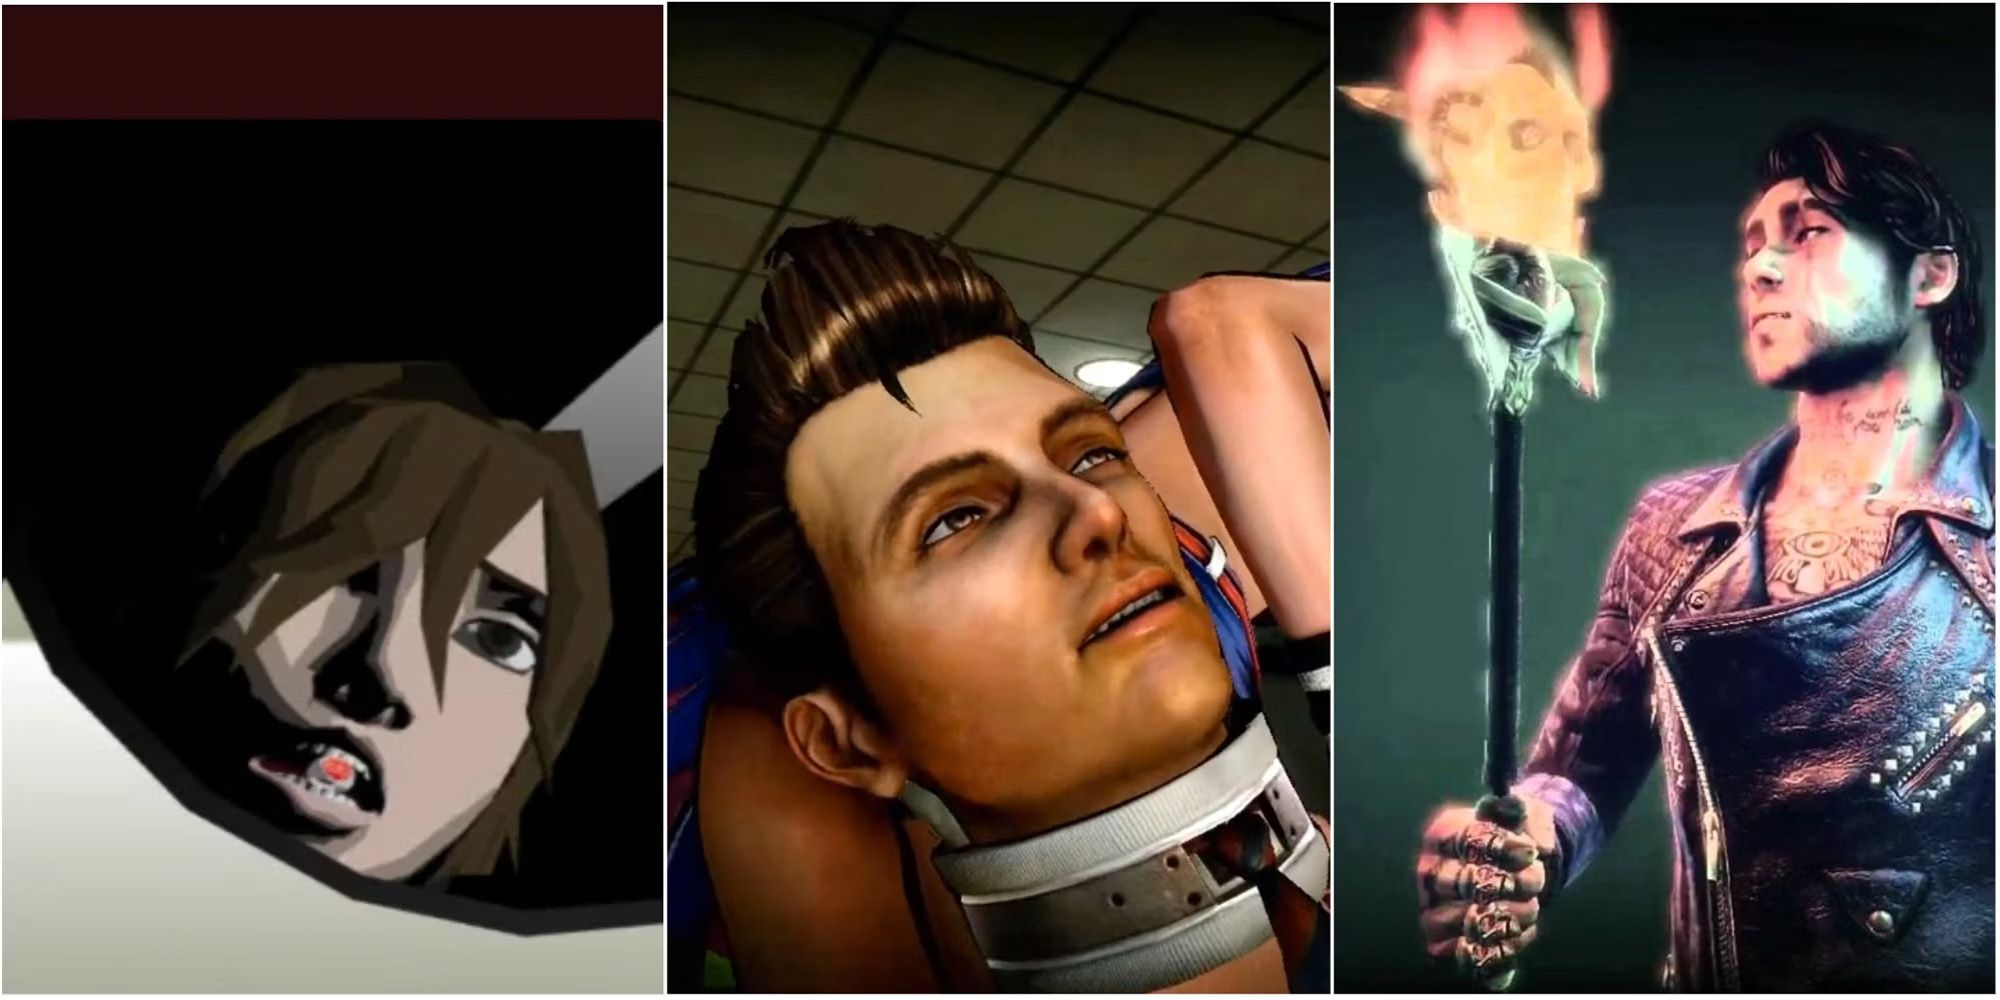 killer7, Shadows of the Damned, and Lollipop Chainsaw cropped